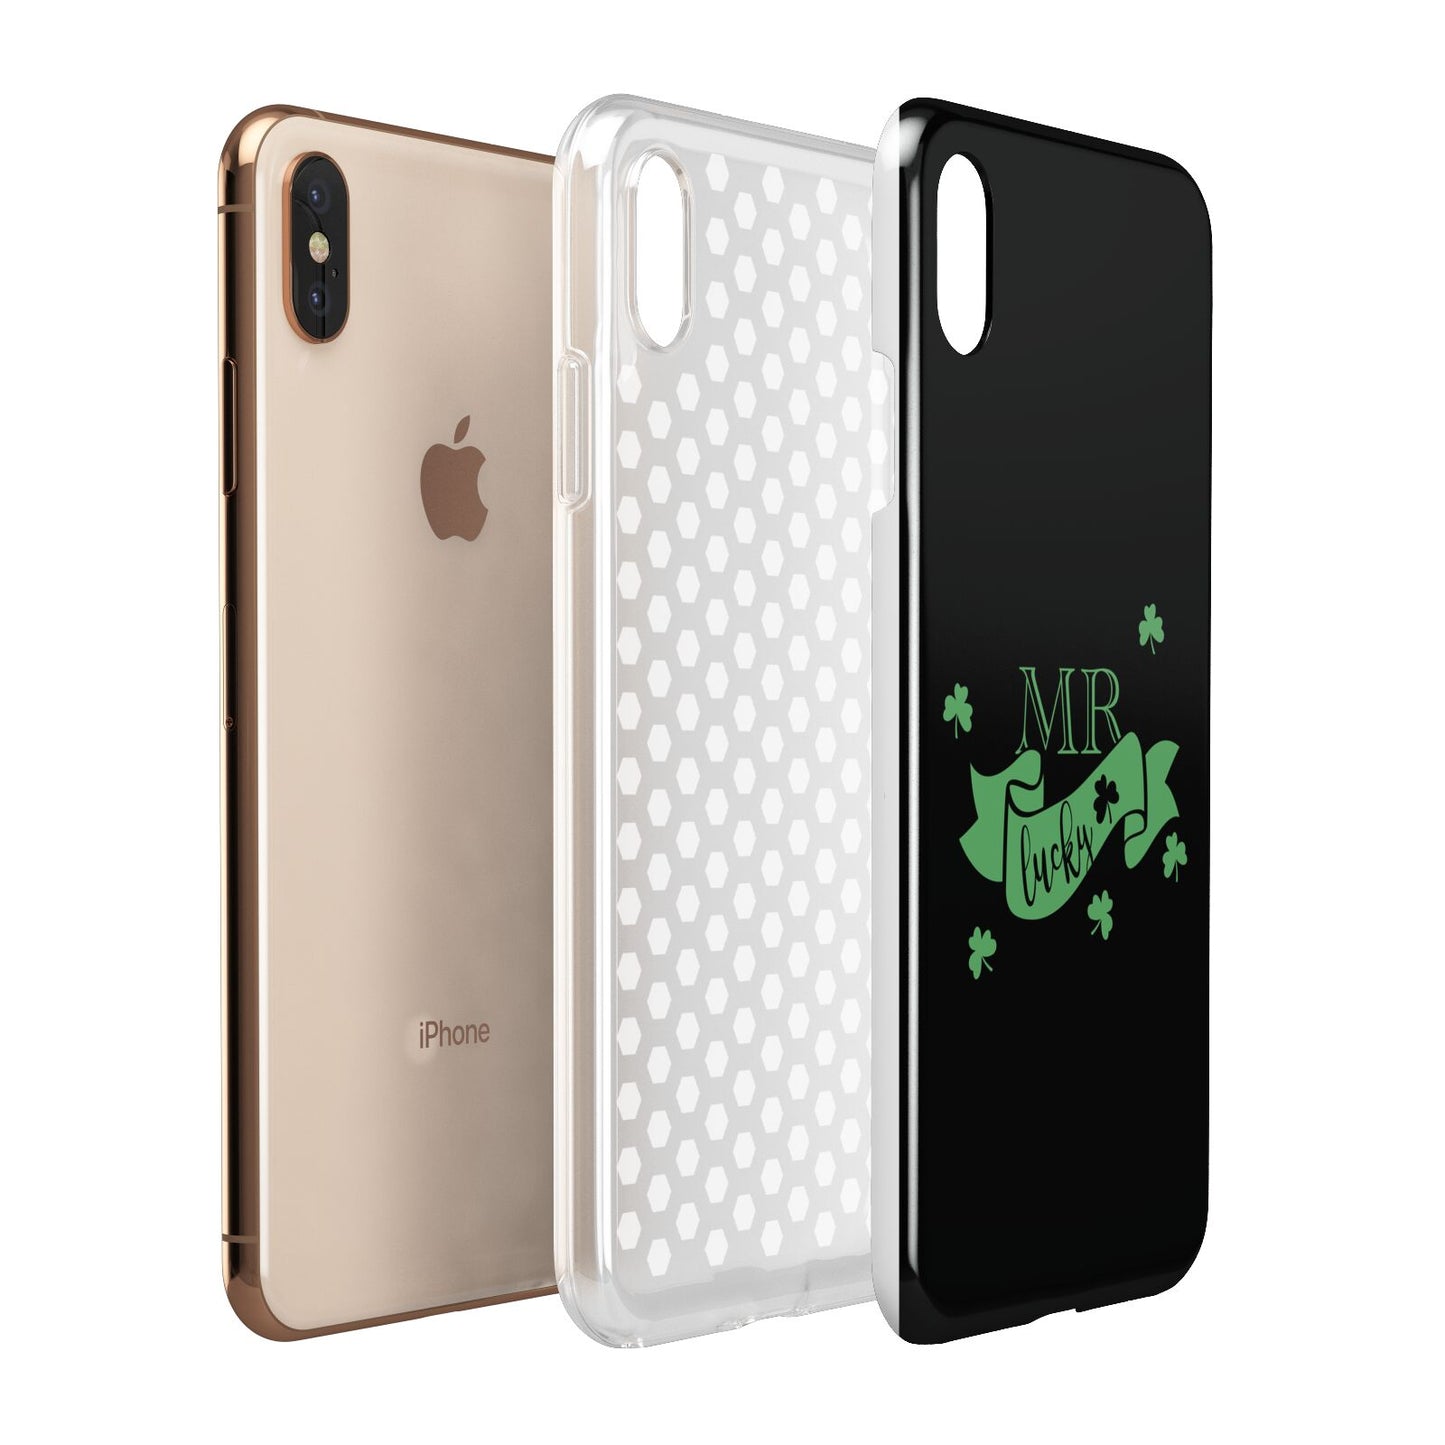 Mr Lucky Apple iPhone Xs Max 3D Tough Case Expanded View